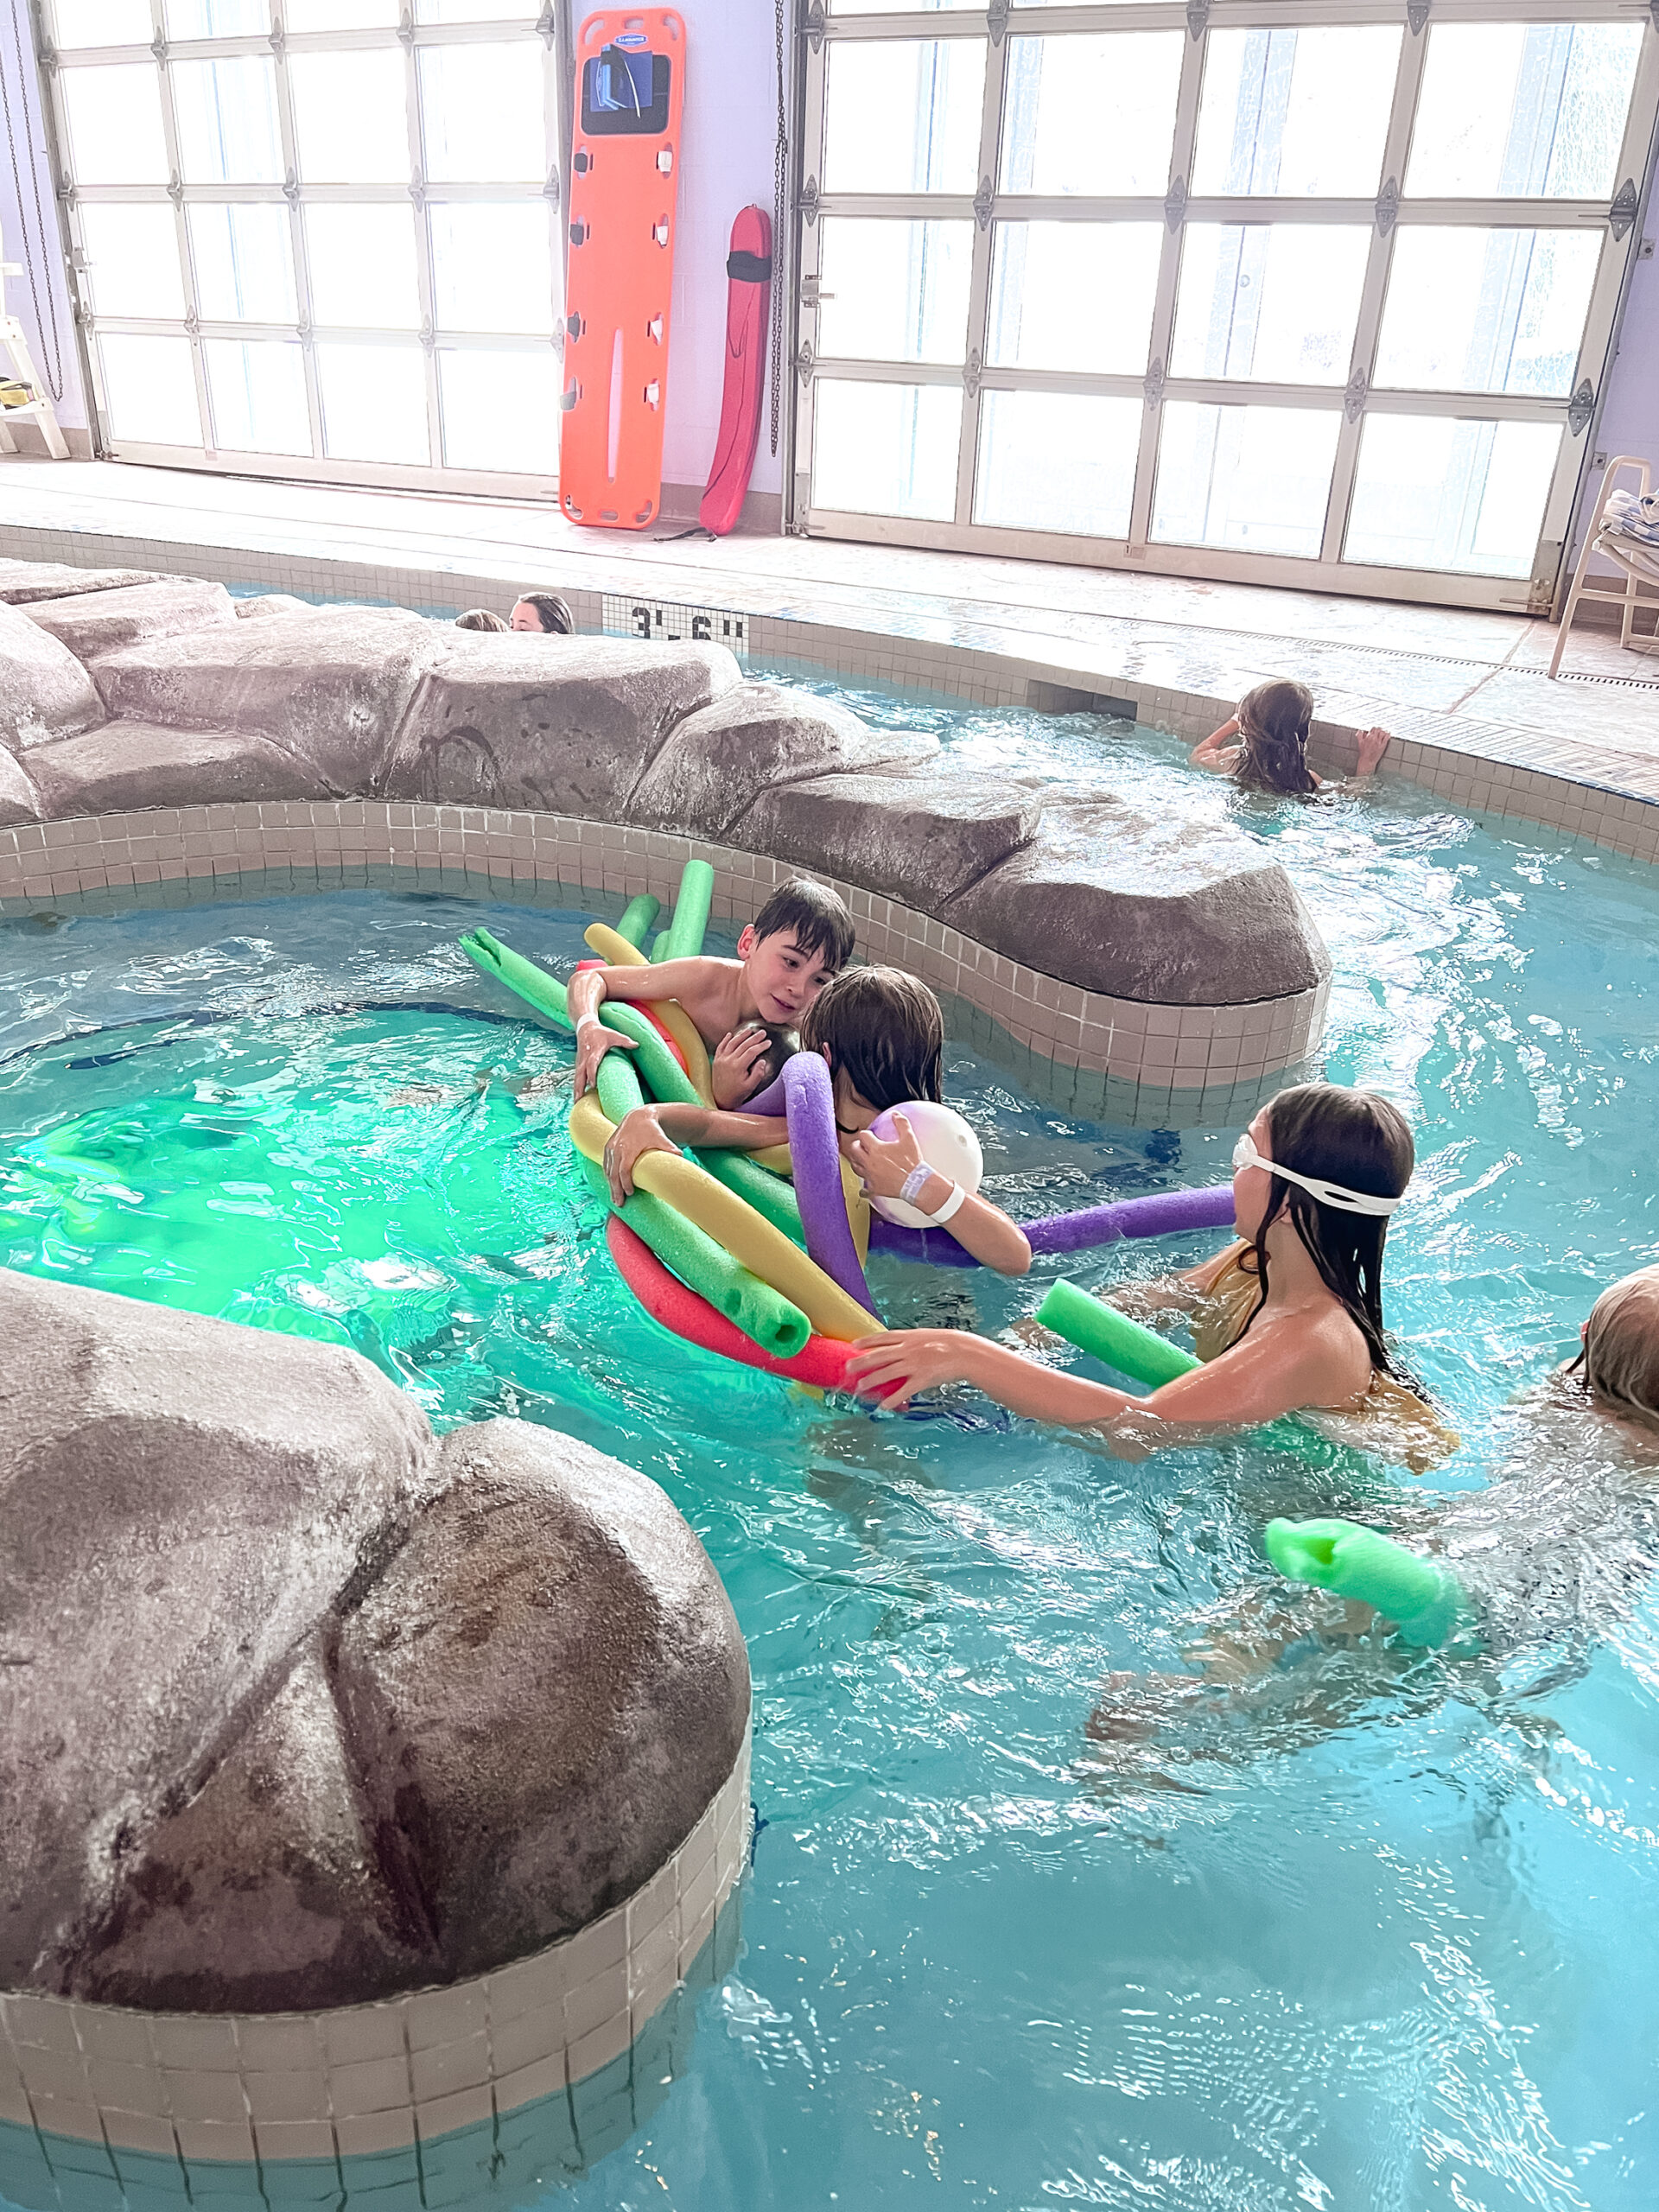 The ARC pool has a lazy river, water slide, zero entry pool area, and diving board! Hours of indoor fun in Aspen for those rainy summer days (they happen!). #ARC #aspenrecreationcenter #thingstodoinaspen